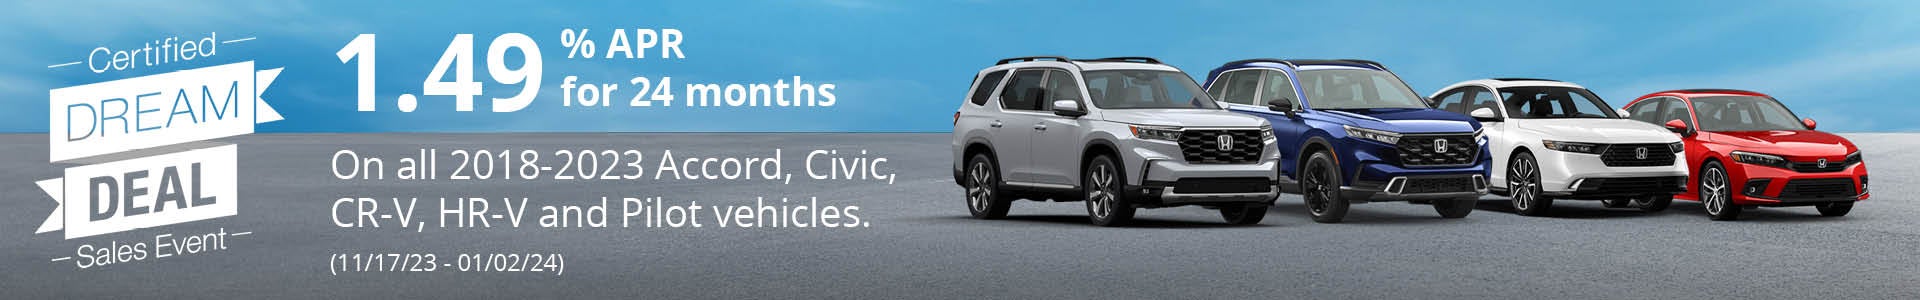 1.49% APR for 24 months on all 2018-2023 Accord, Civic, CR-V, HR-V and Pilot vehicles. 11/17/23 - 01/02/24